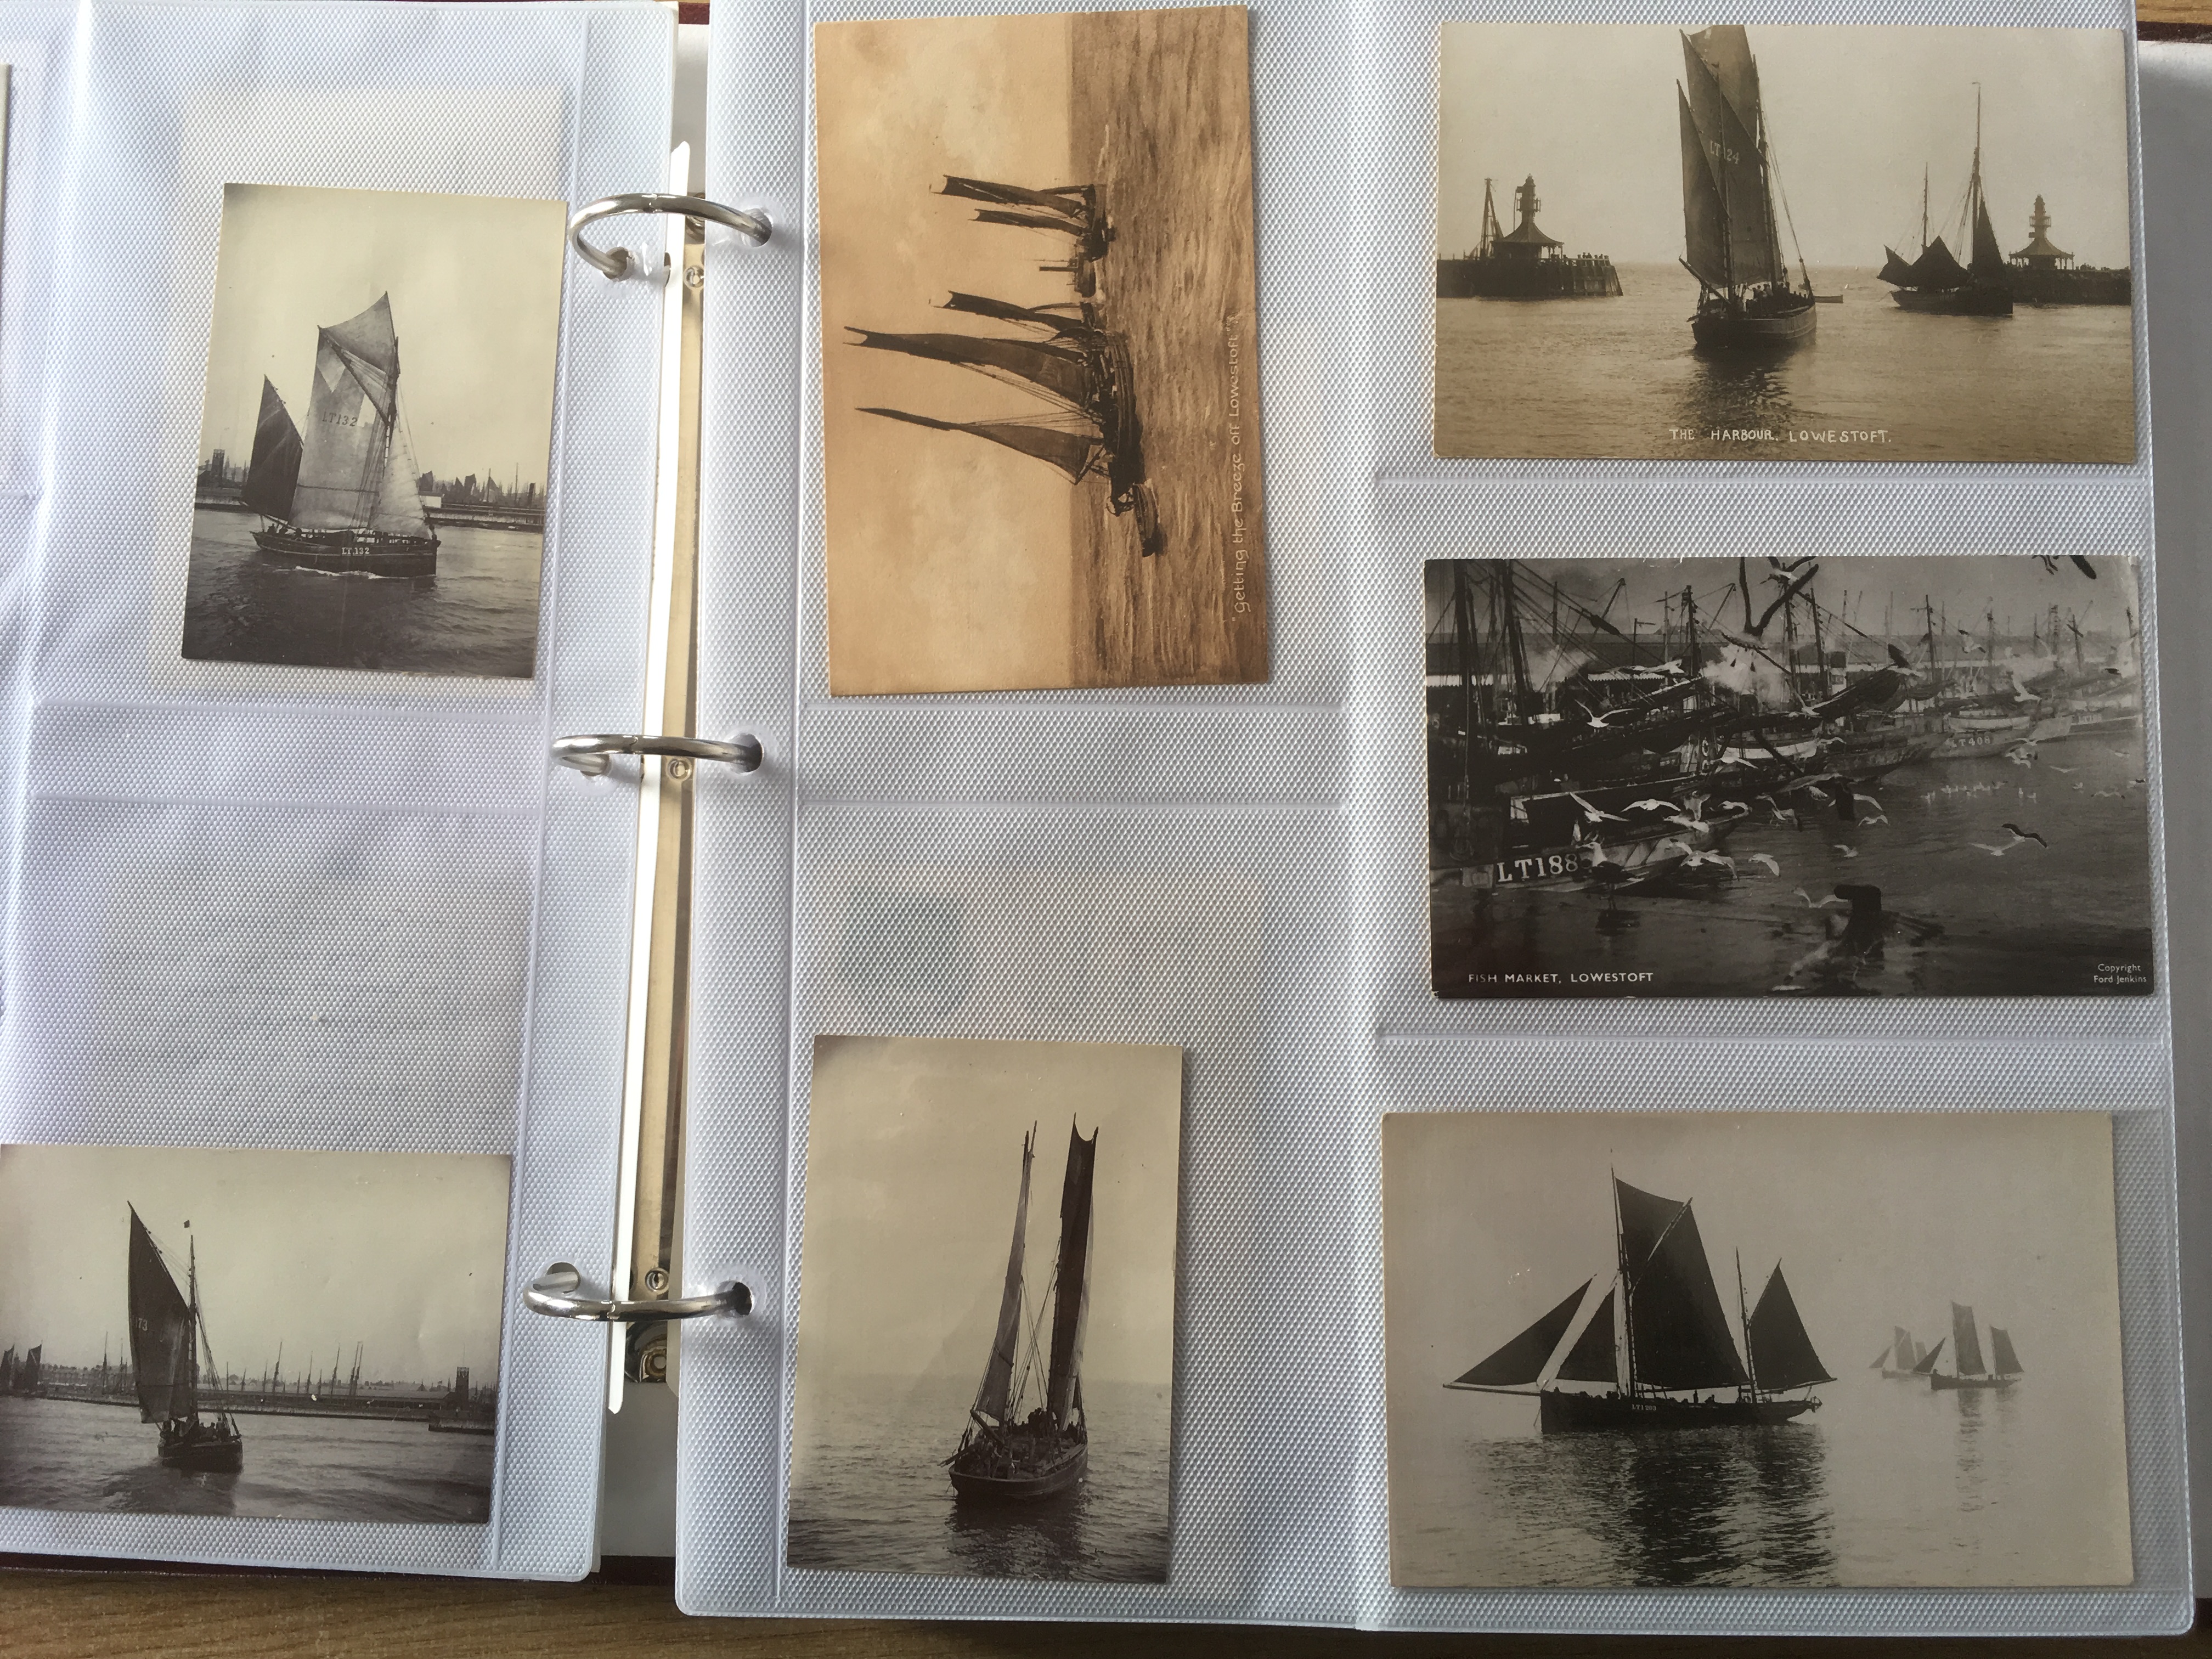 SUFFOLK: ALBUM WITH A COLLECTION OF LOWESTOFT FISHING INDUSTRY POSTCARDS AND A FEW PHOTOS. - Image 3 of 8